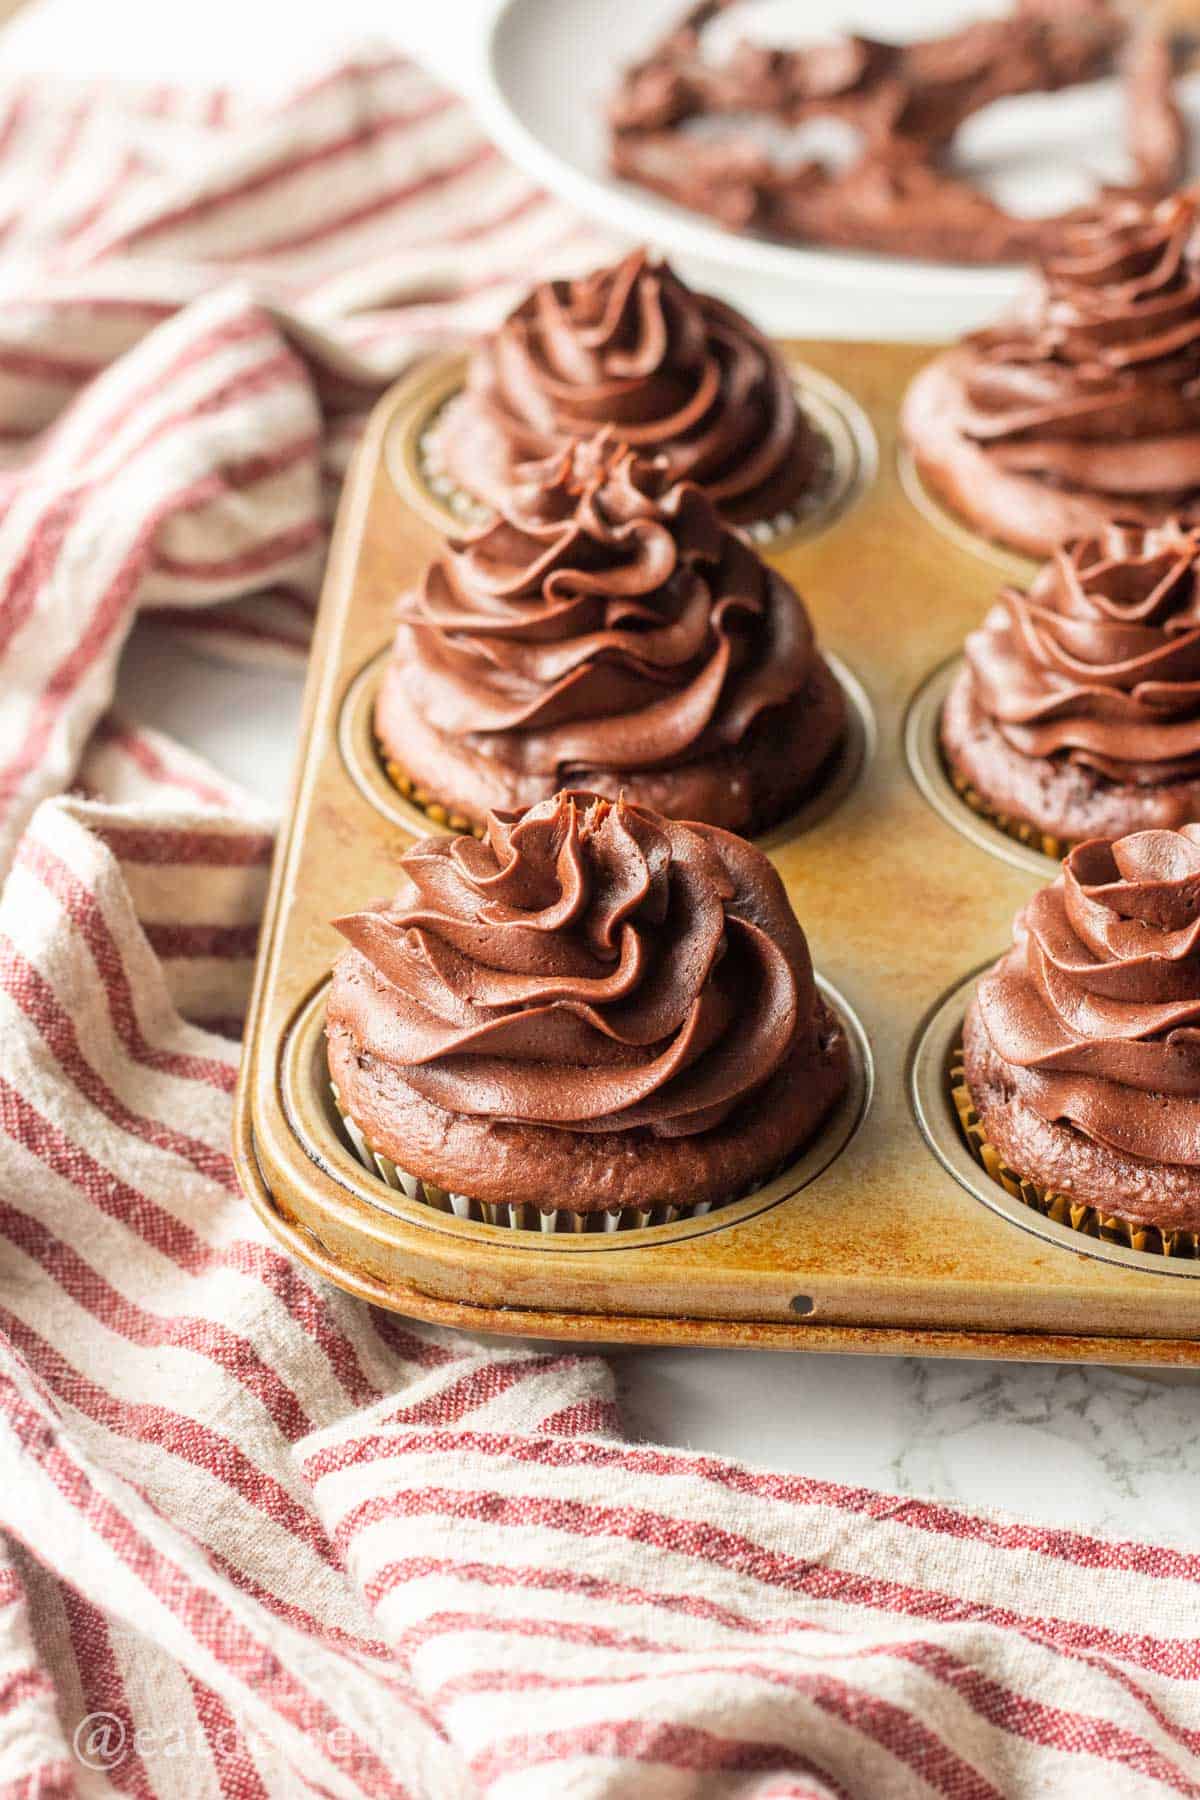 Chocolate frosted cupcakes in metal pan.